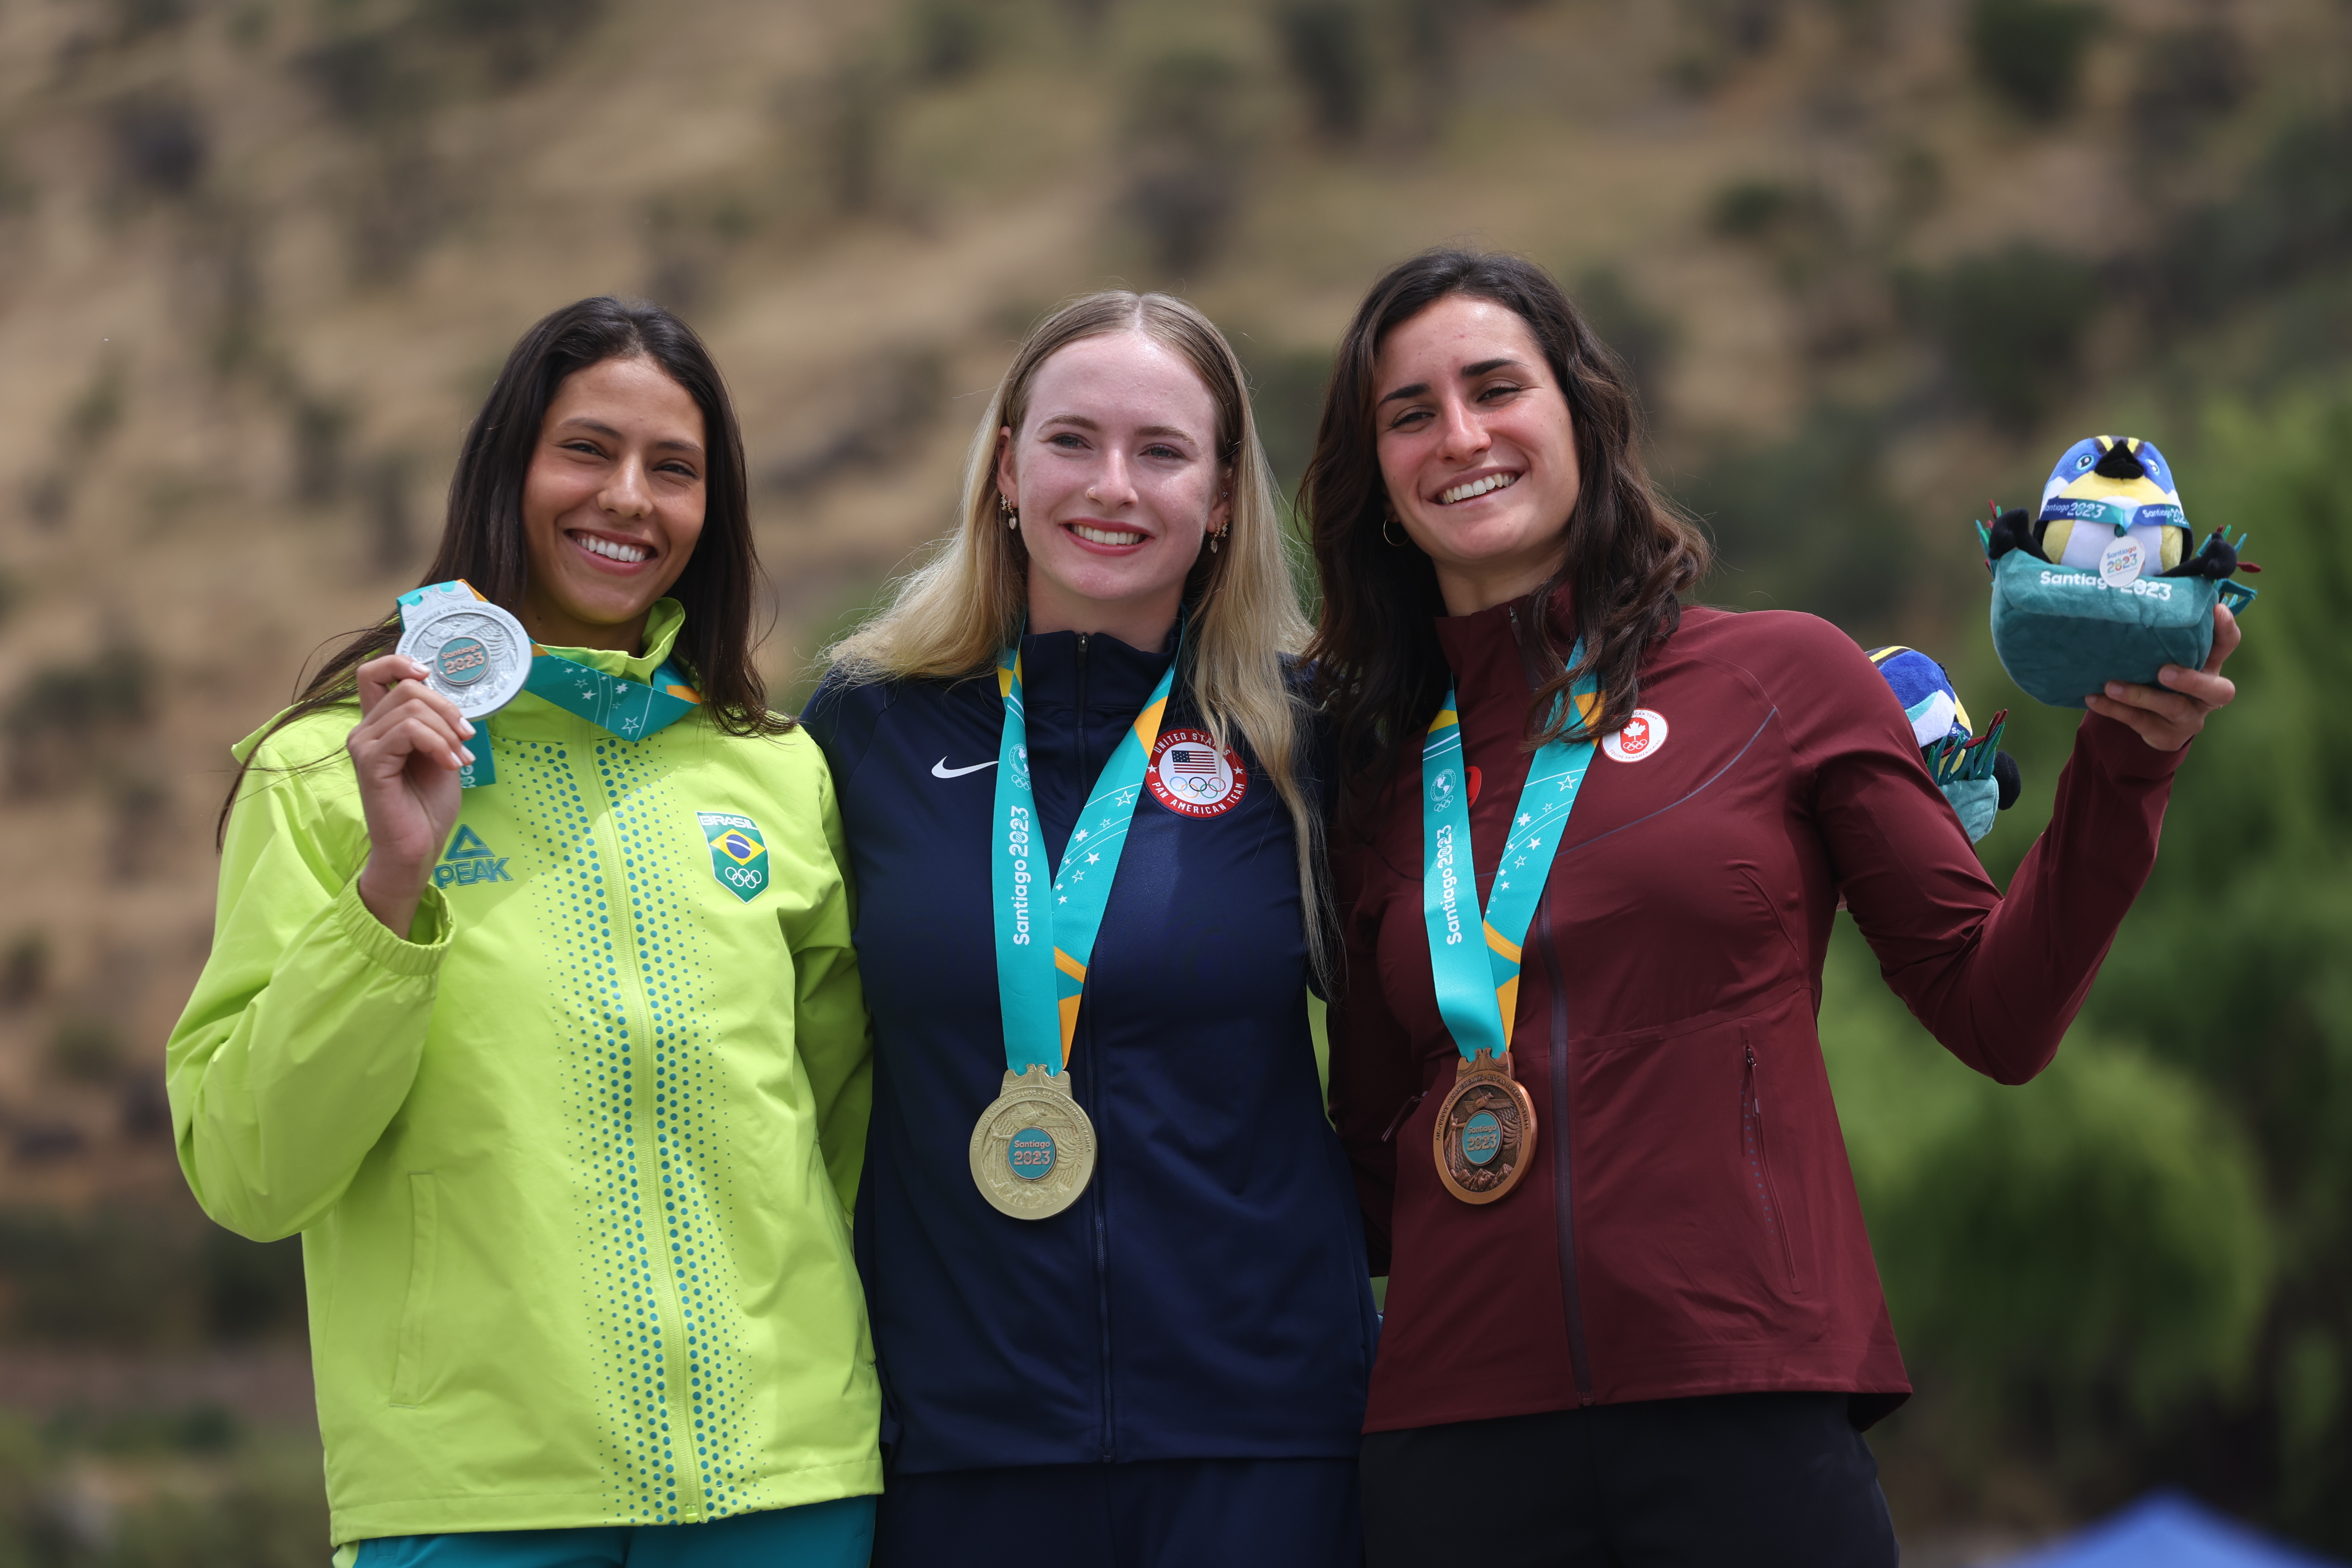 Three women stand on a podium wearing medals